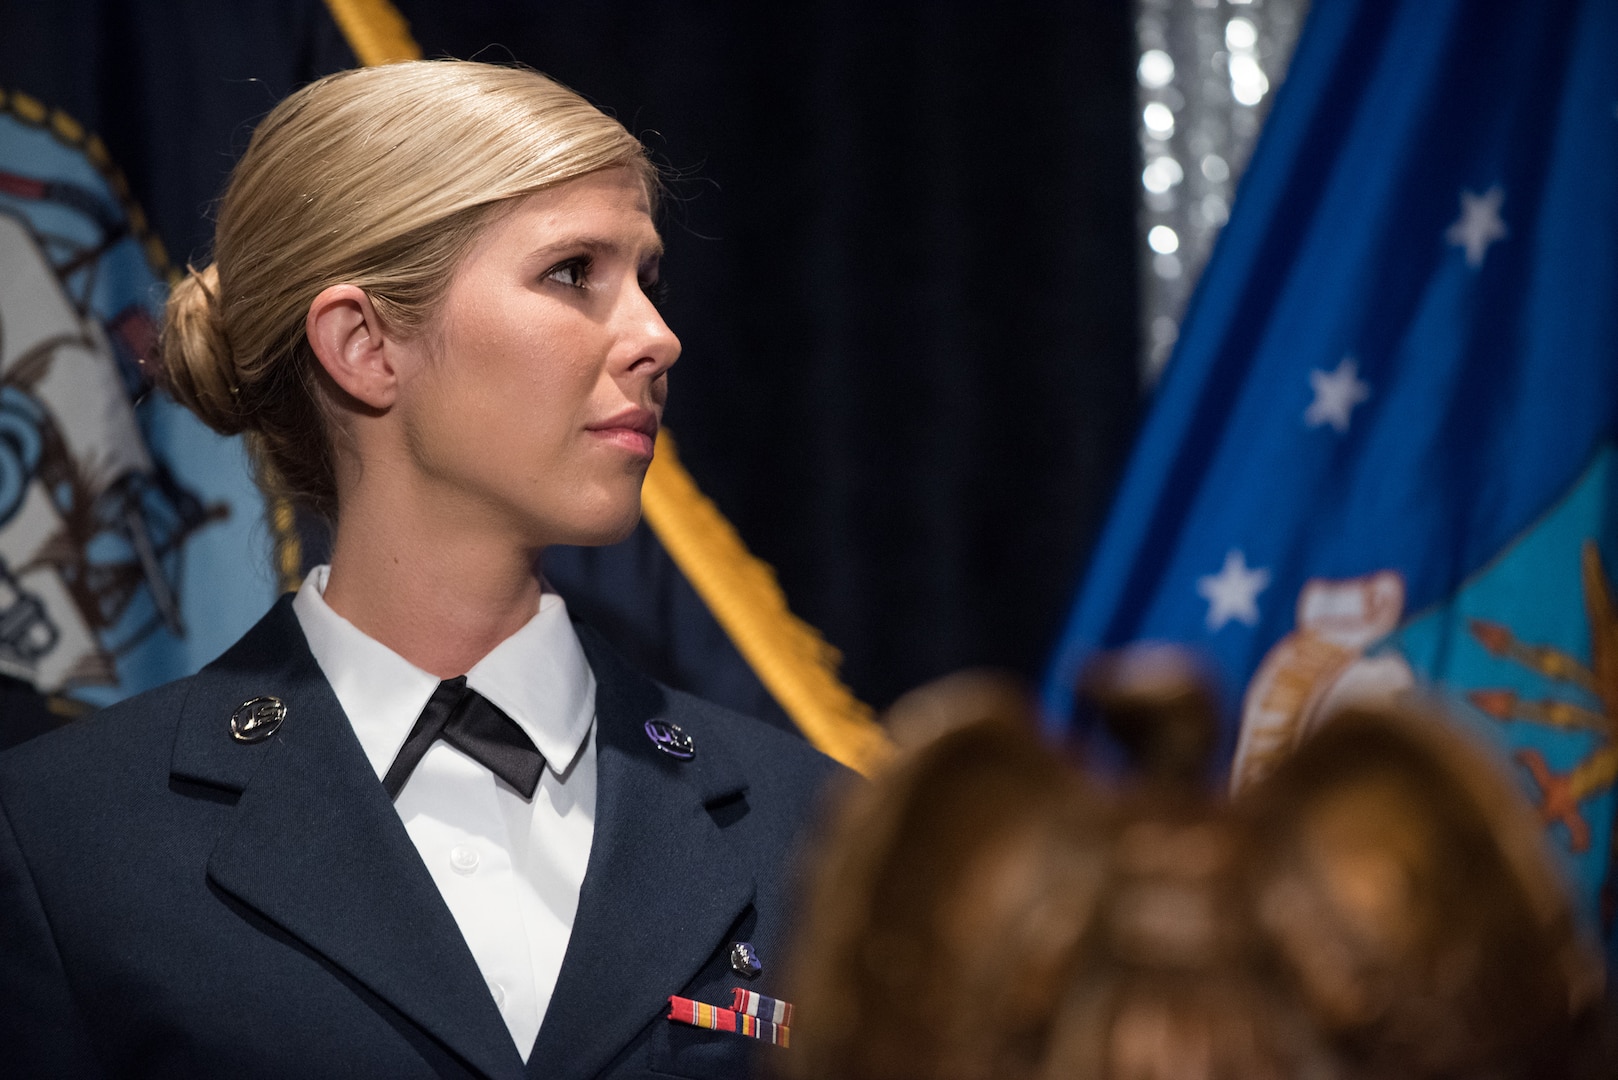 Angels of the Battlefield award recipient Senior Airman Linda M. Wilson, who risked her own life to save lives of others during deadly mass shooting at Route 91 Harvest Festival in Las Vegas, Nevada, stands onstage during 2018 Armed Services YMCA Angels of the Battlefield Award Gala, in Arlington, Virginia, October 2, 2018 (DOD/James K. McCann)